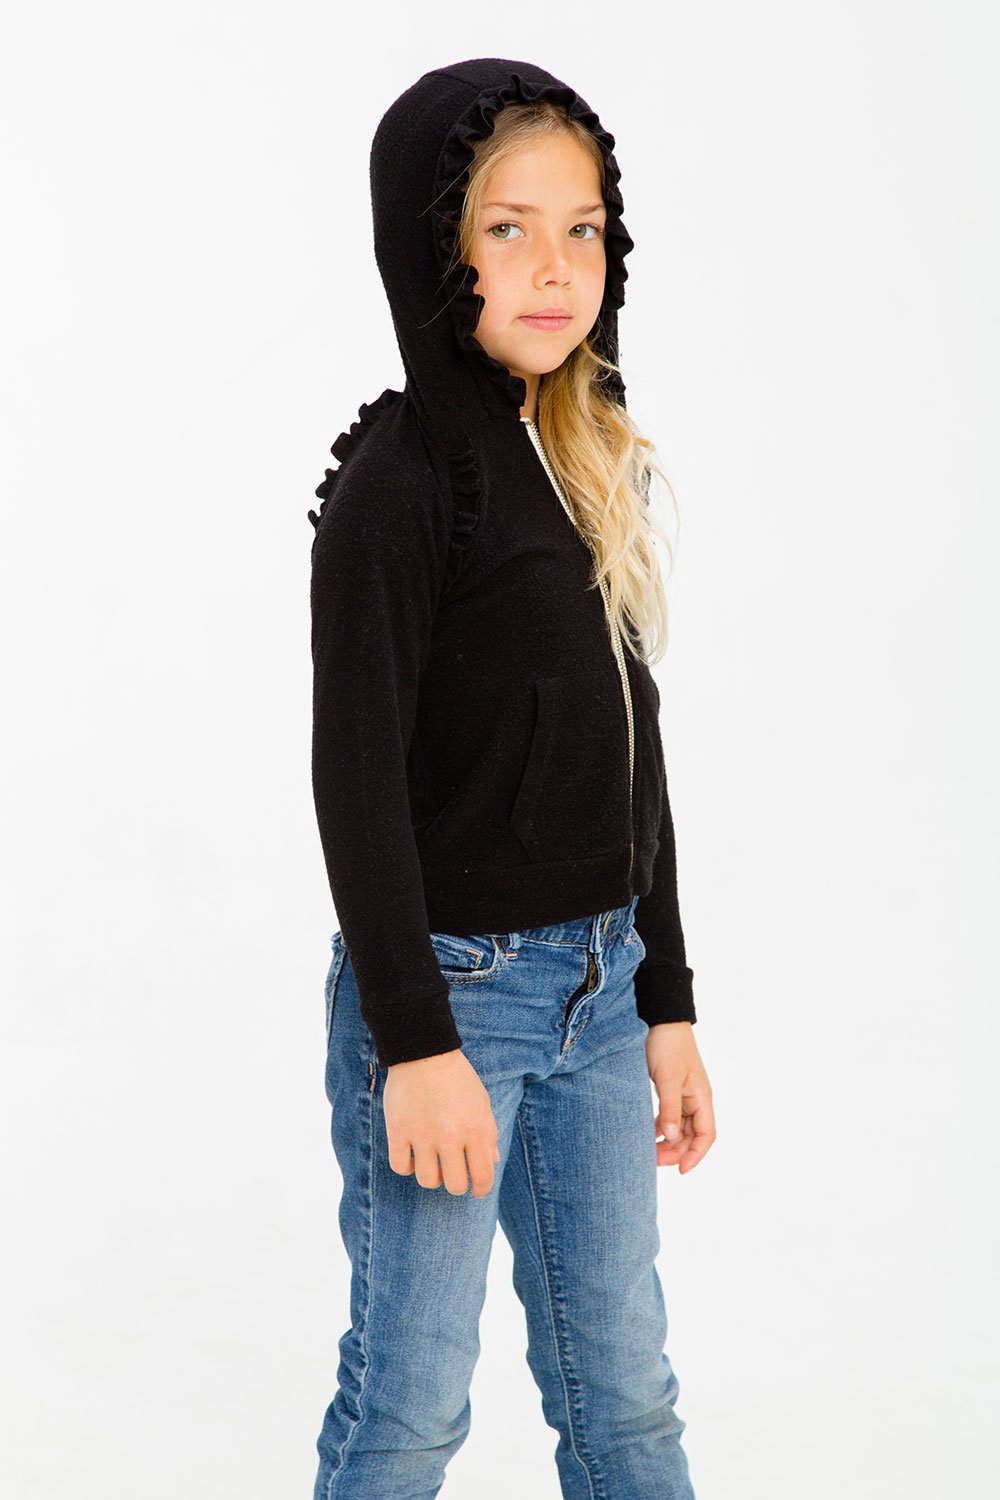 Chaser Girls Long Sleeve Hoodie with Ruffle Detail (Size 2, 14)